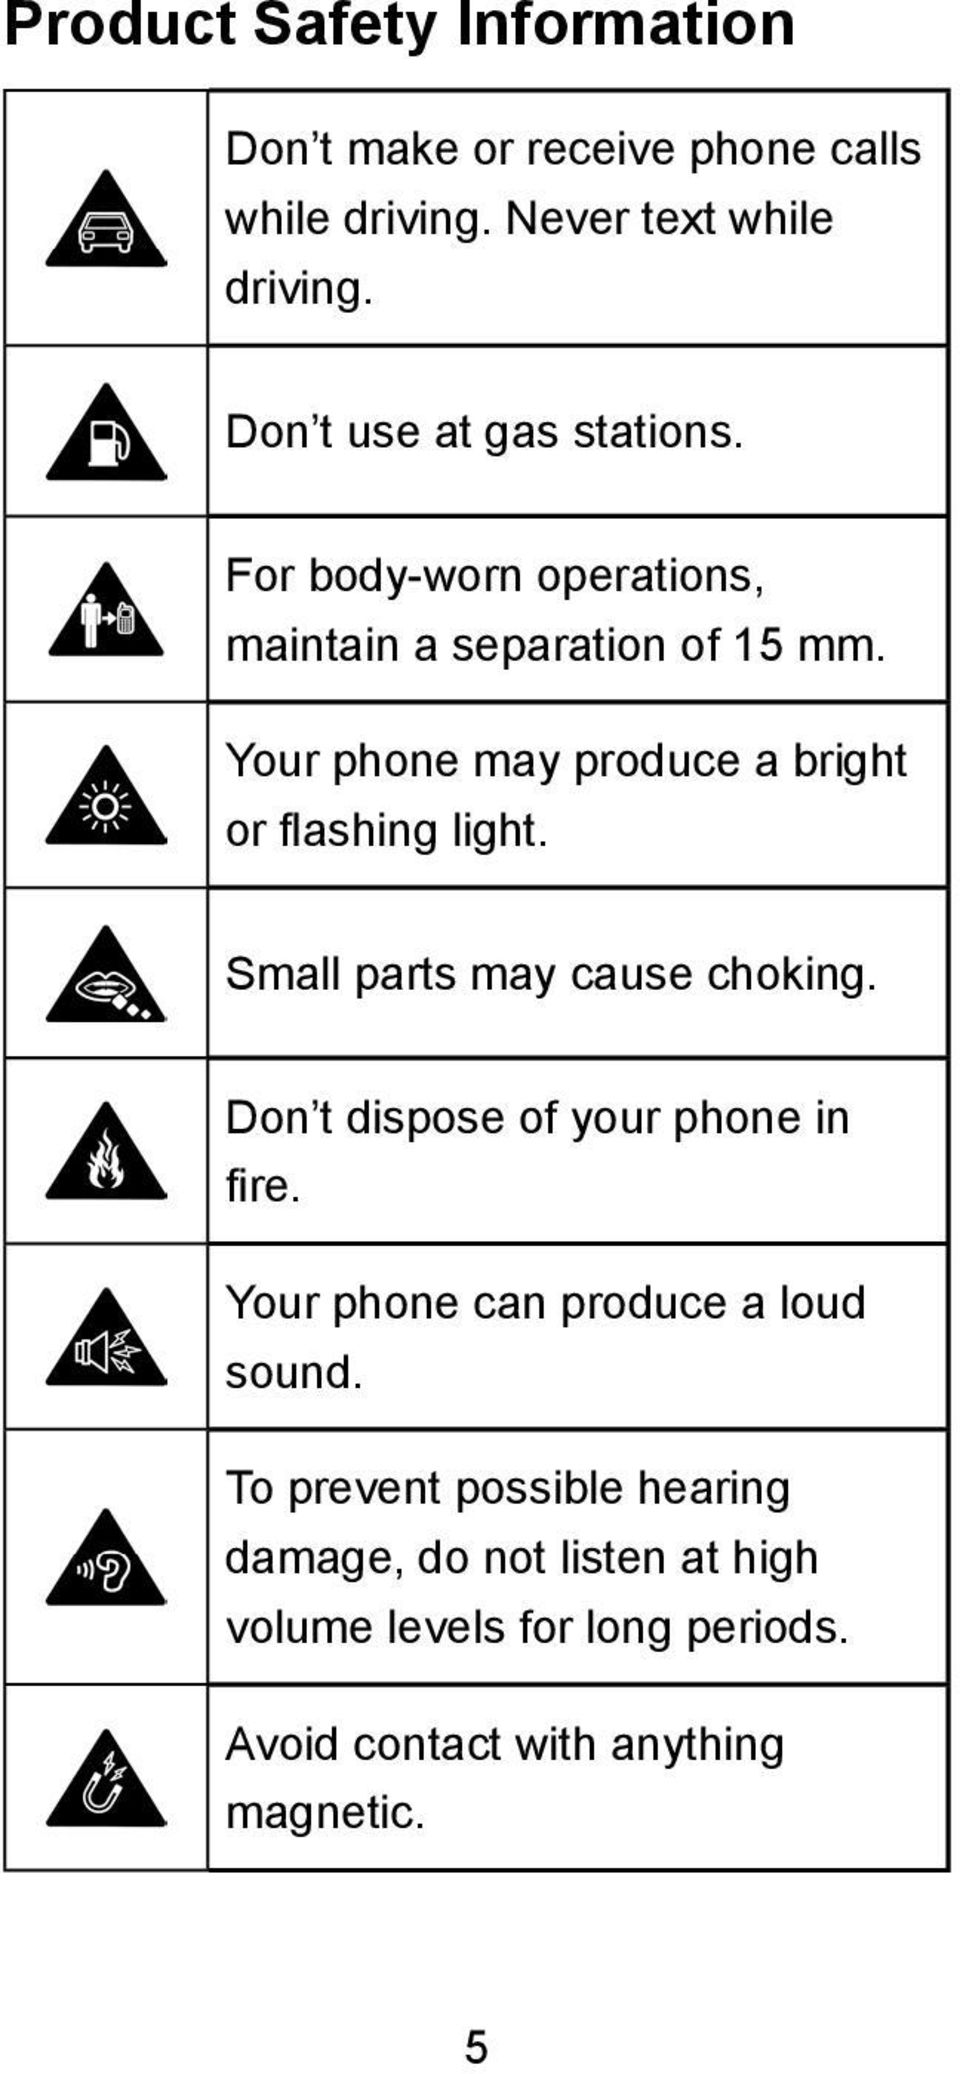 Your phone may produce a bright or flashing light. Small parts may cause choking. Don t dispose of your phone in fire.